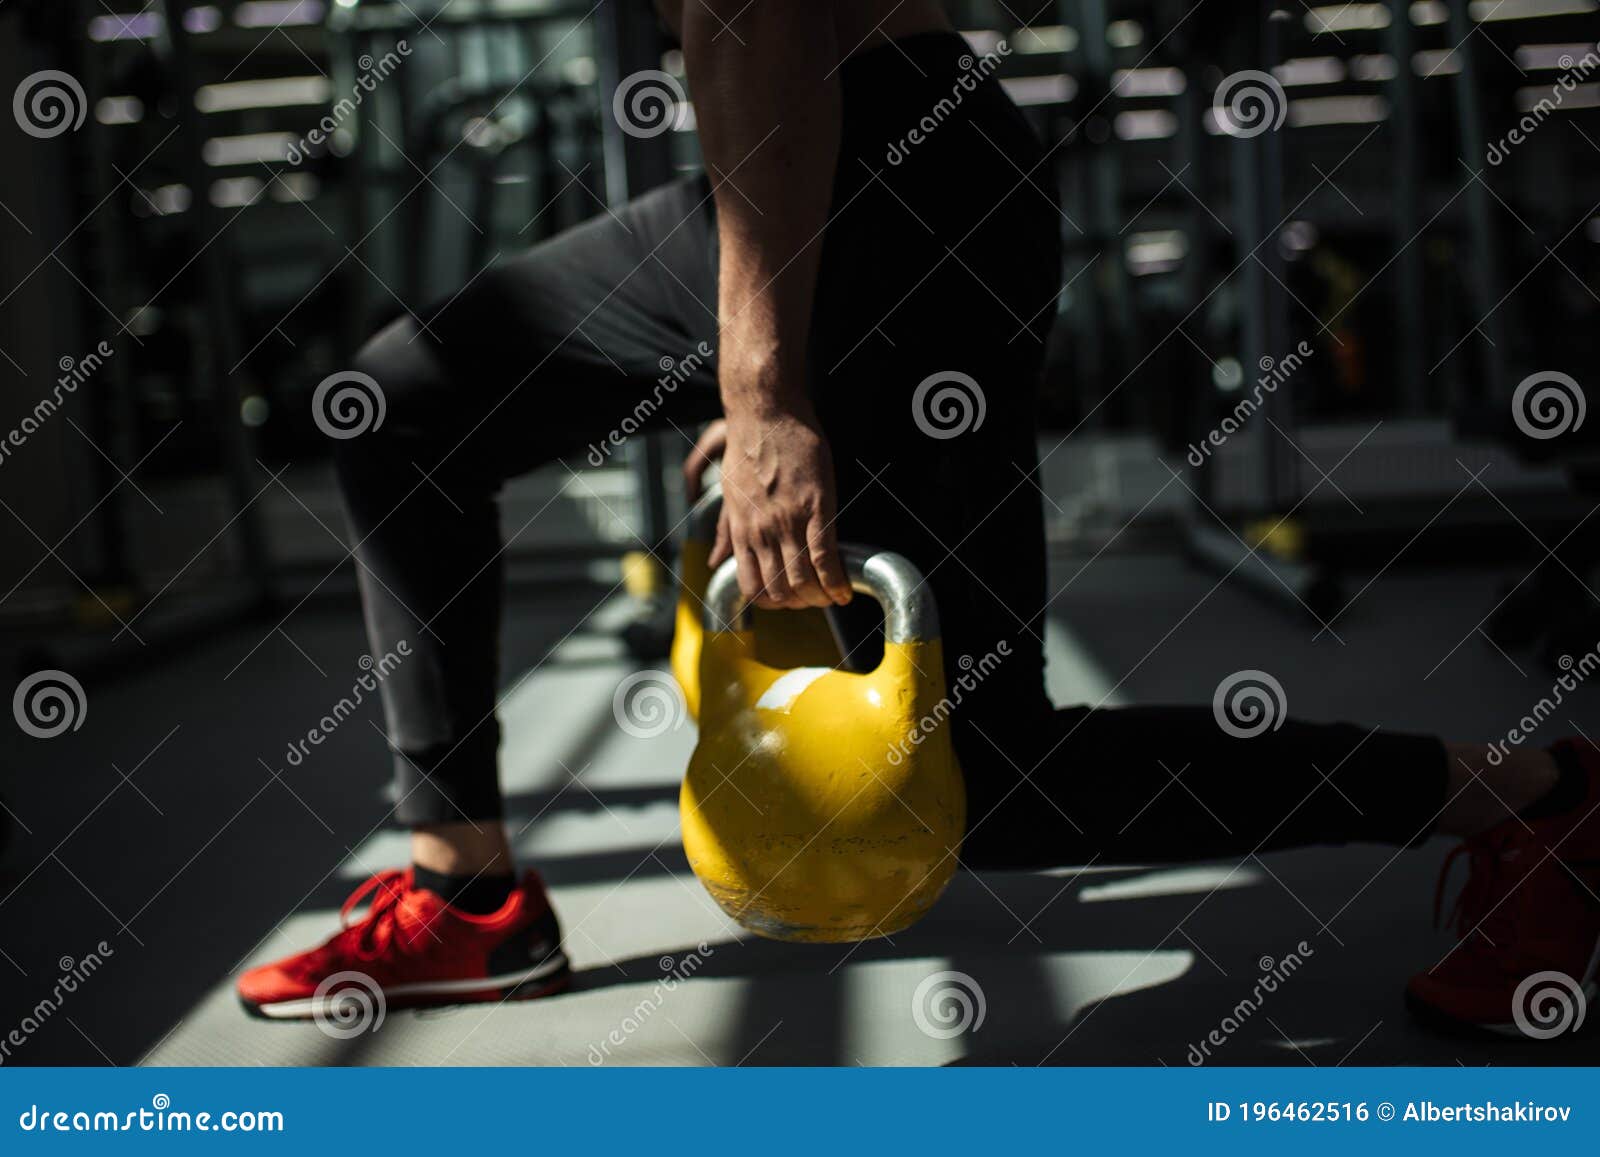 167,523 Fitness Handsome Male Stock Photos - Free & Royalty-Free Stock ...